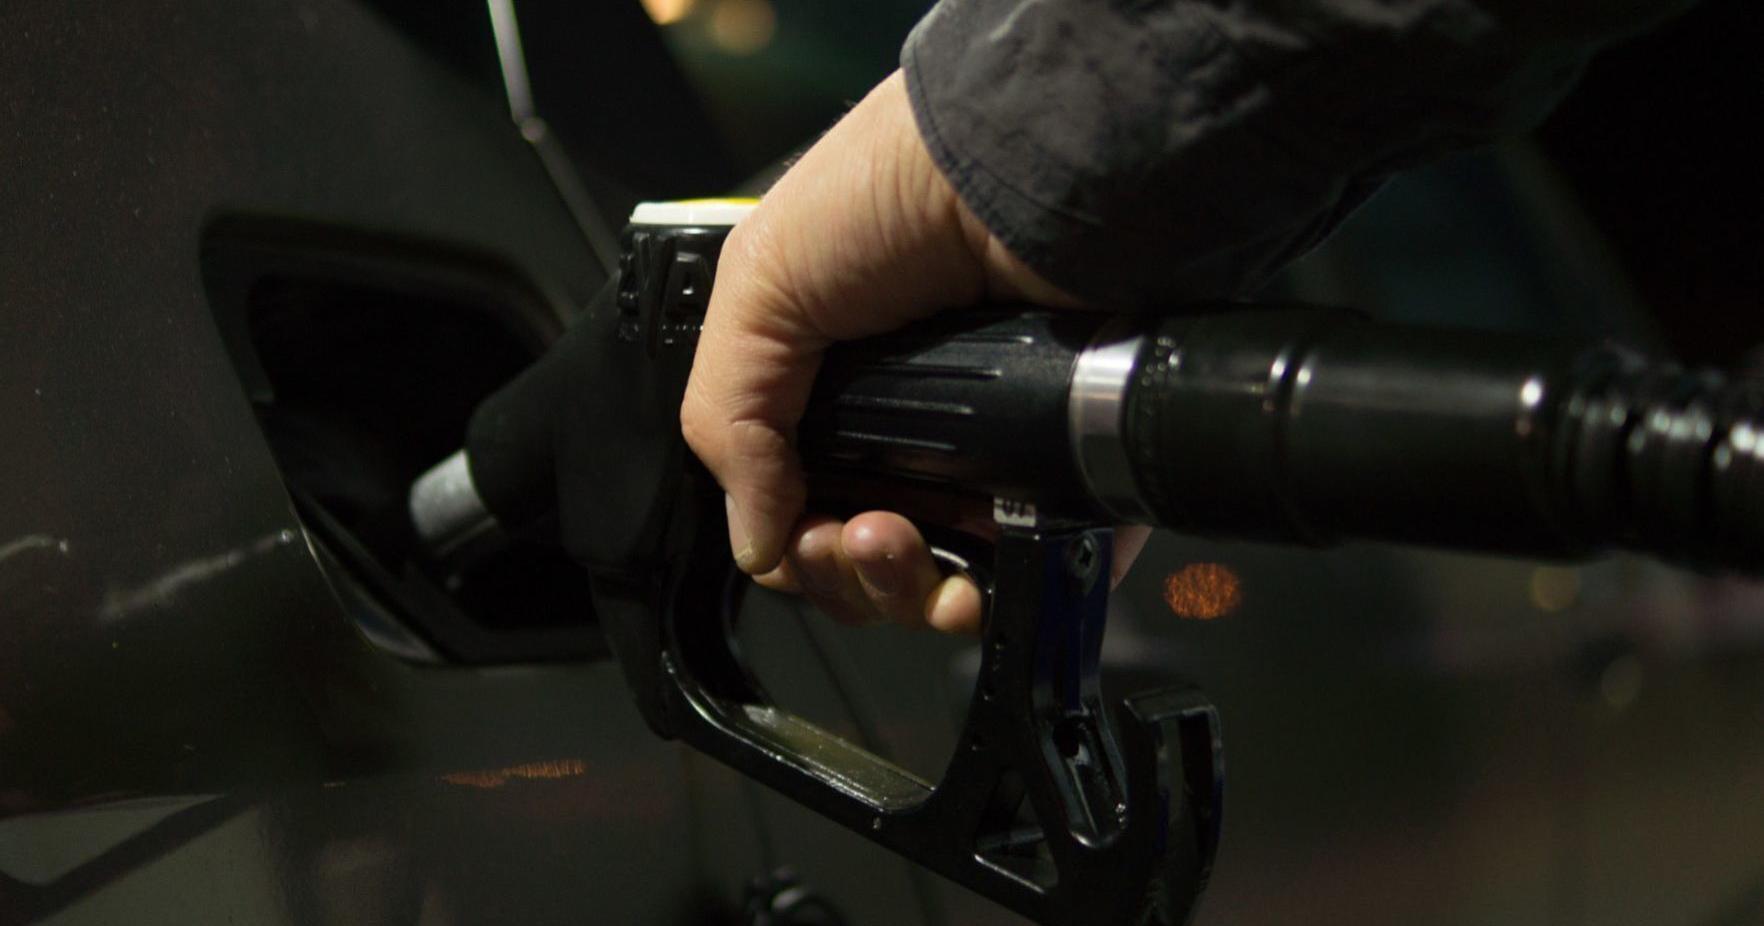 Nebraska lawmakers pass bill requiring gas stations sell fuel with 15% ethanol